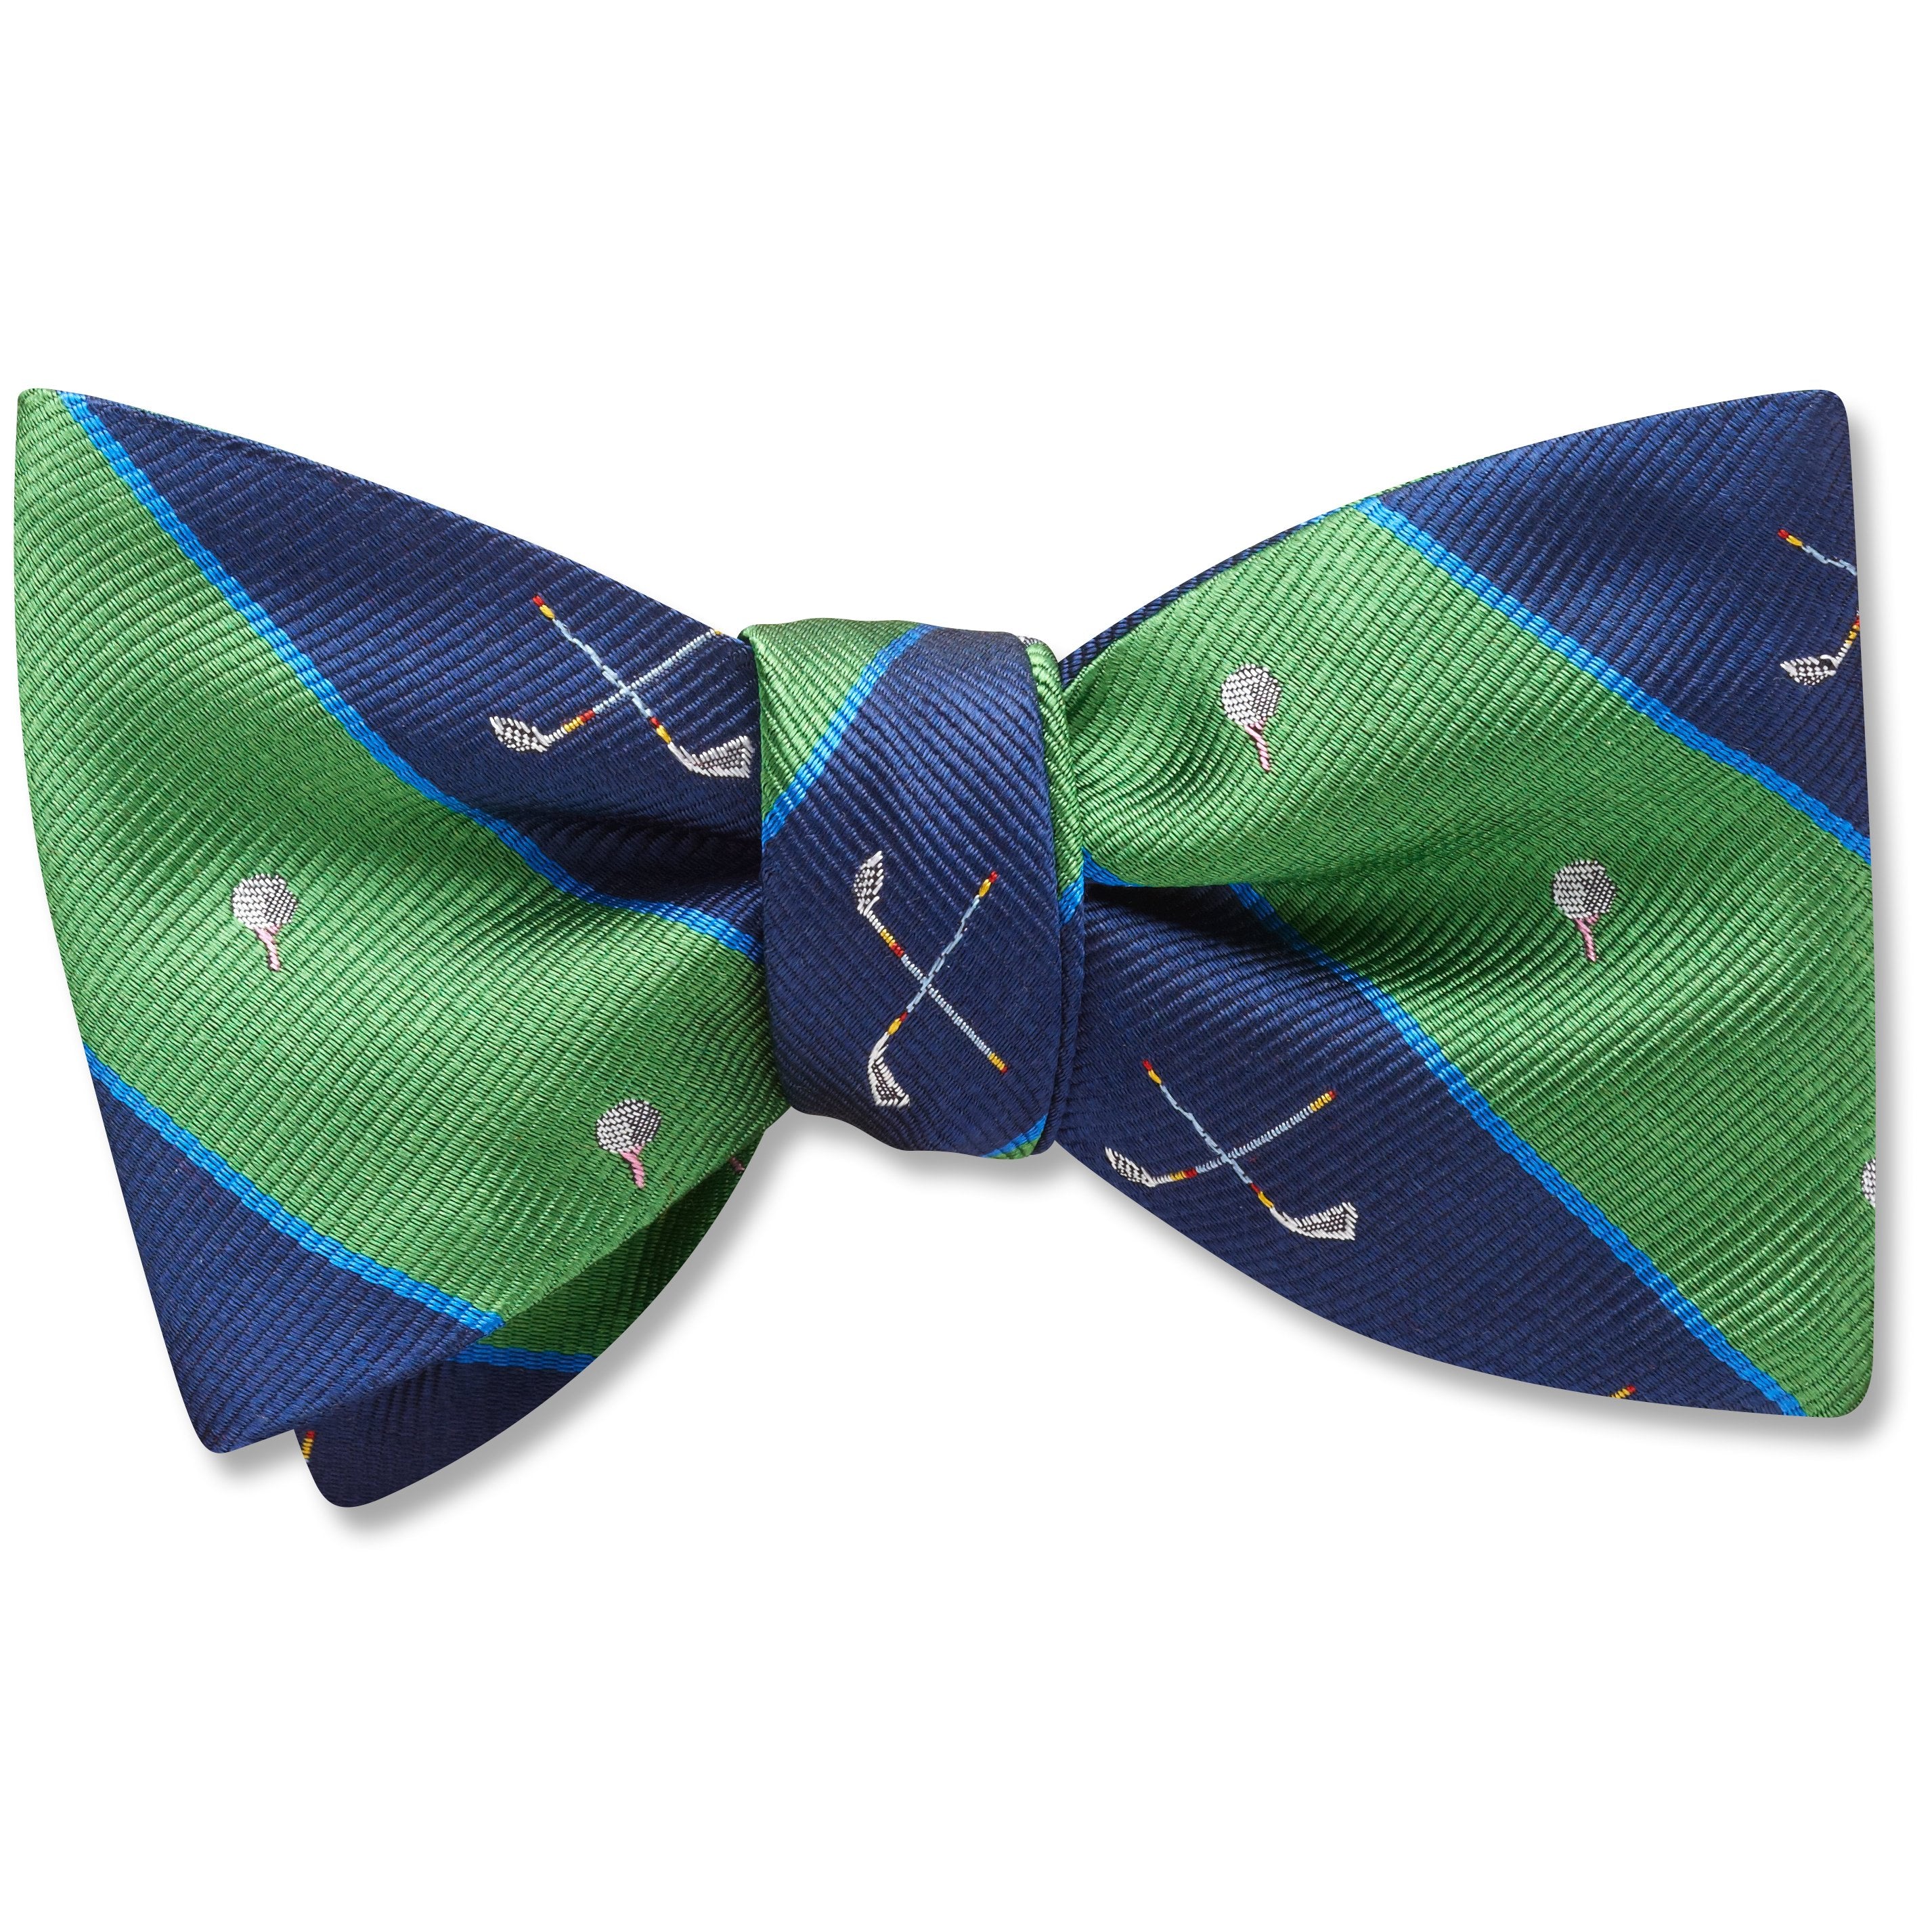 Green and Navy Stripe Socks / Beau Ties of Vermont